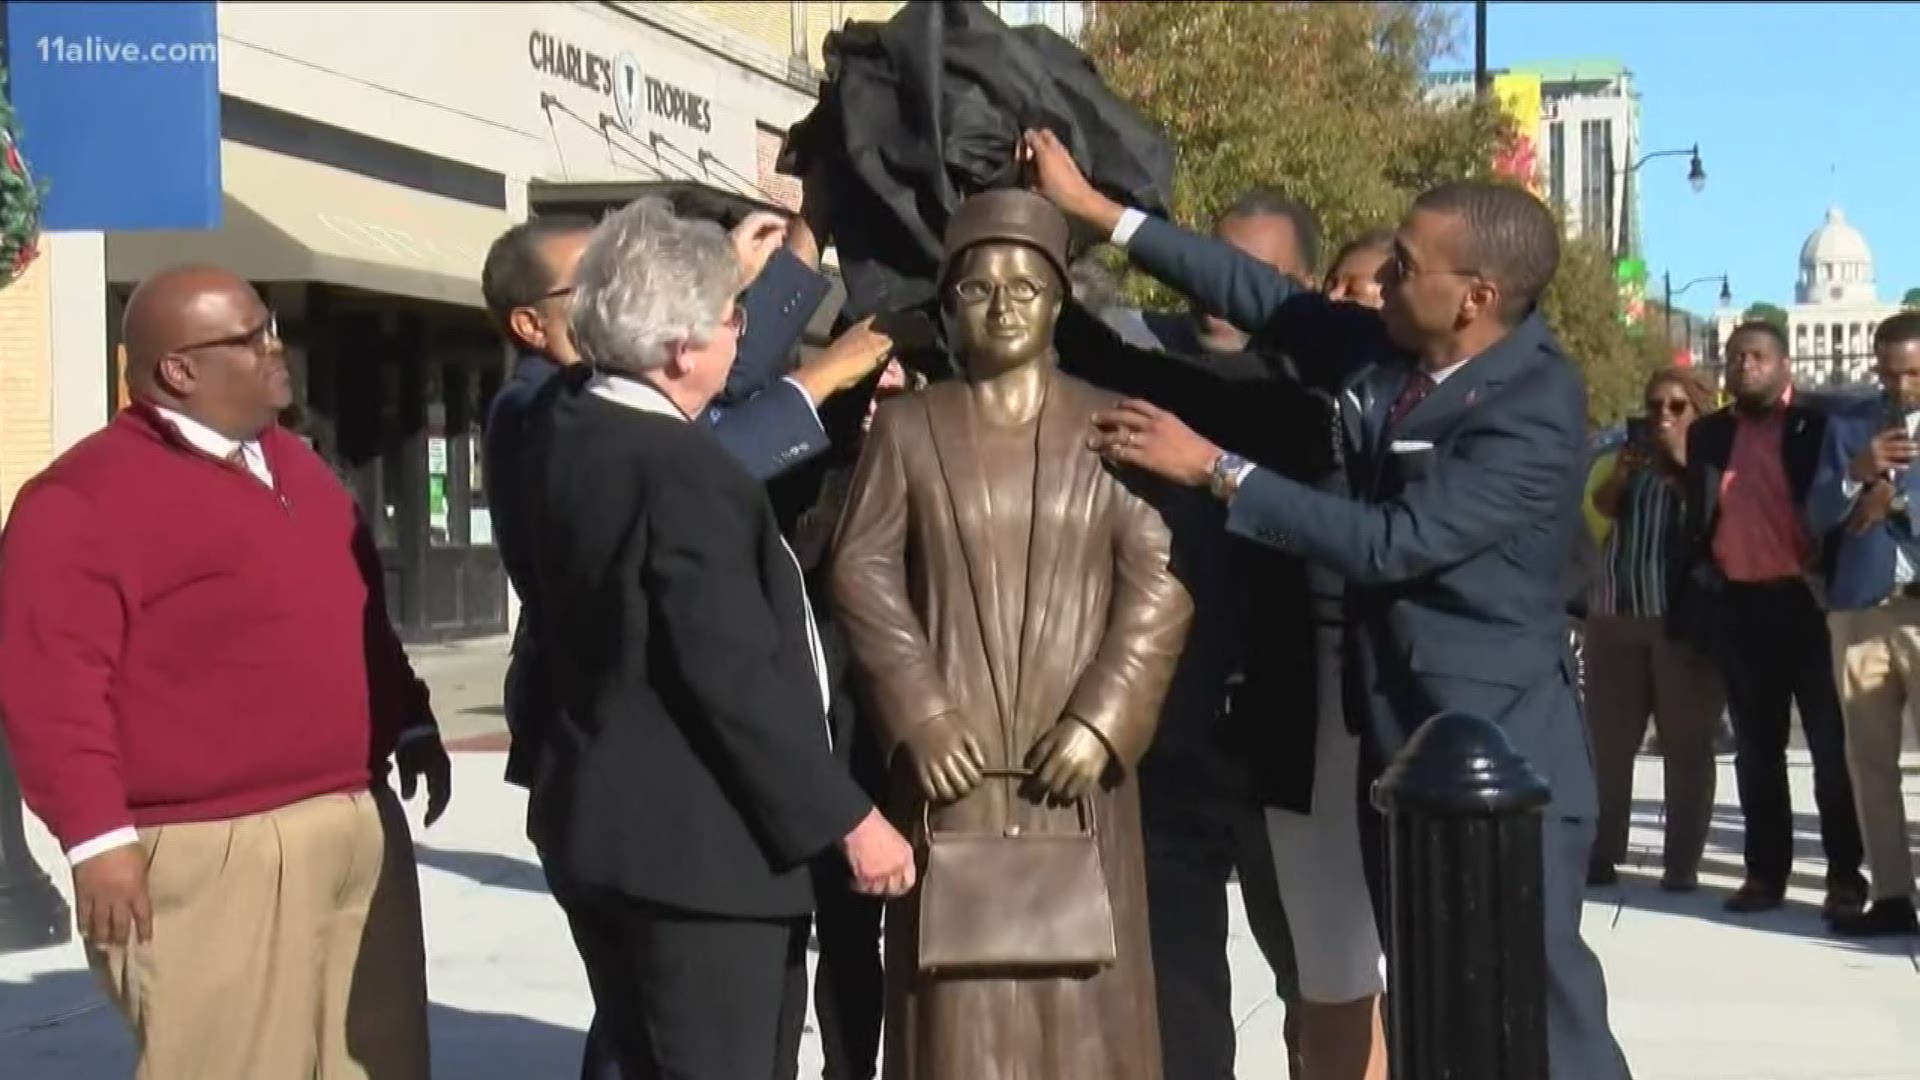 The statue was dedicated in Alabama’s capital city on Sunday, the 64th anniversary of her historic refusal to give up her seat on a public bus to a white man.